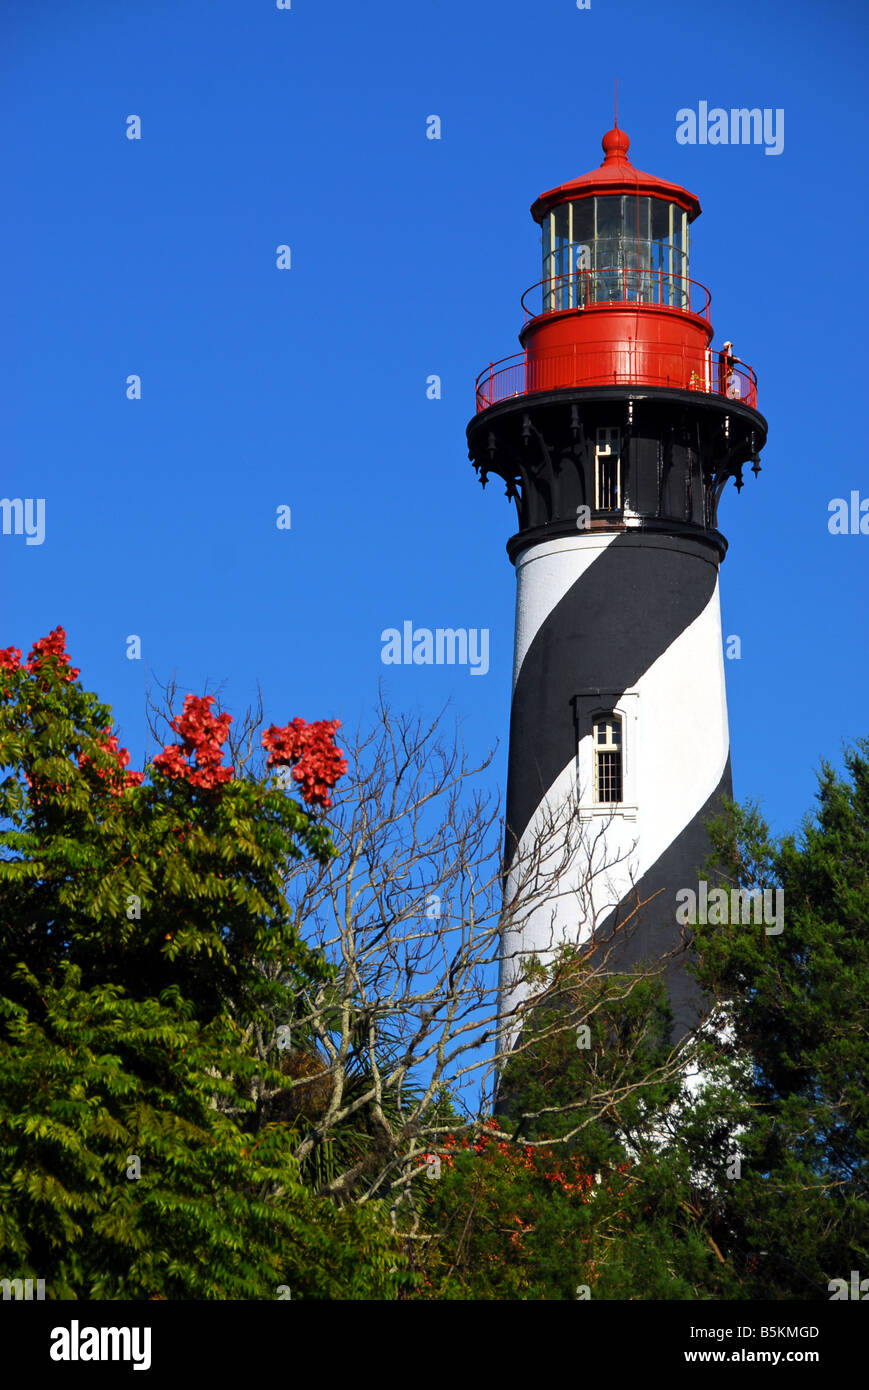 The St. Augustine Lighthouse soars above the treetops on a beautiful fall day in Florida. Stock Photo